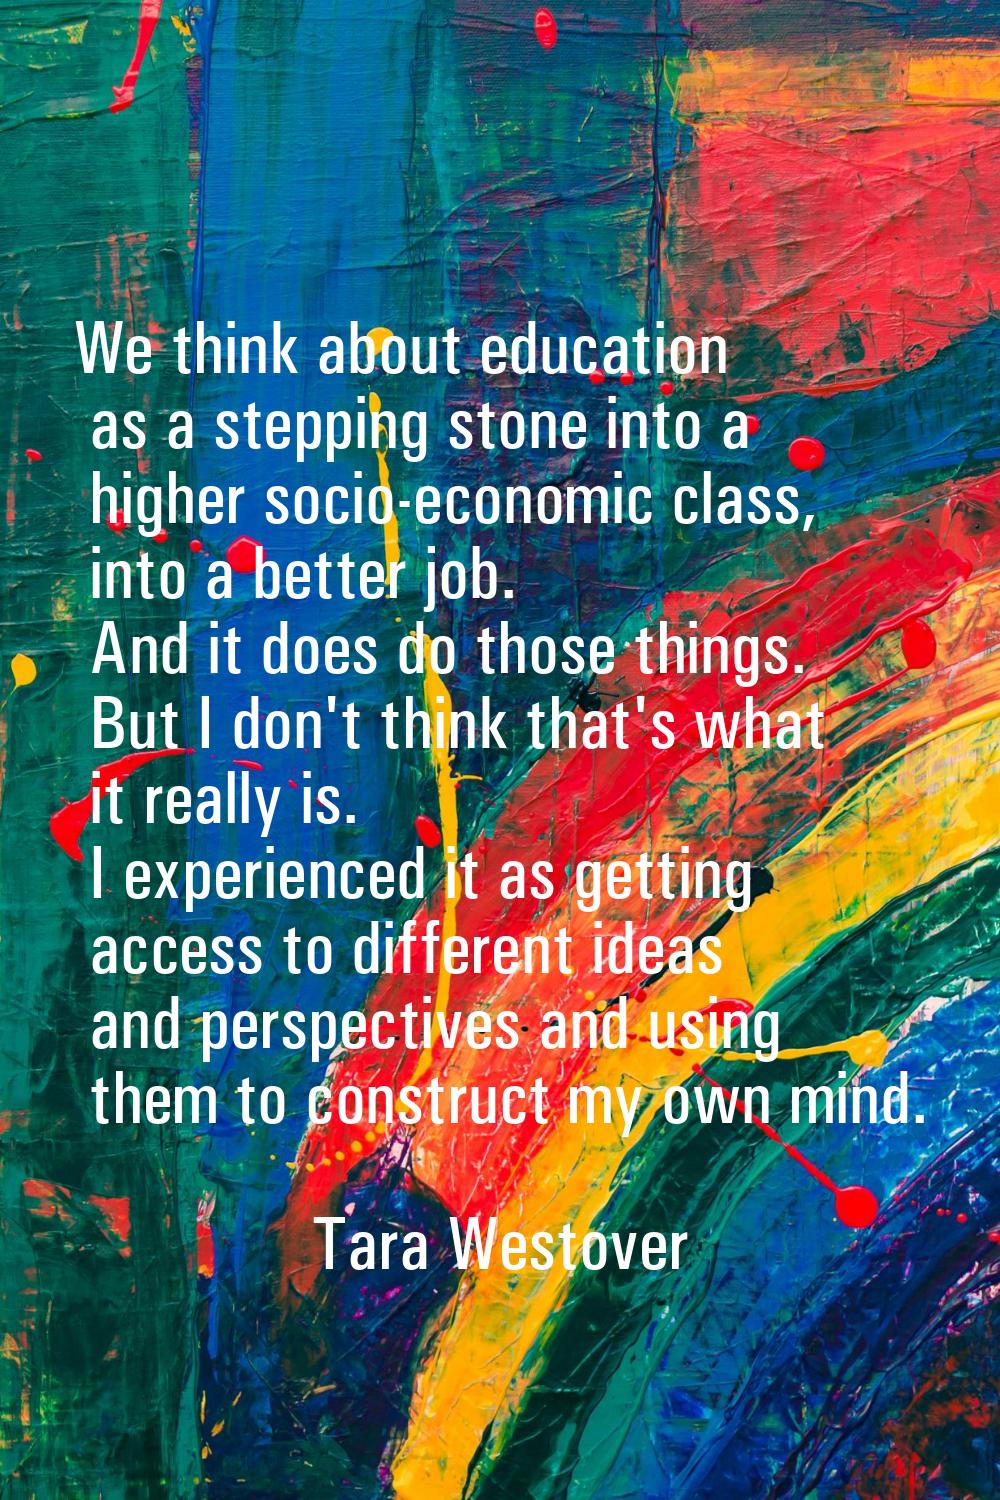 We think about education as a stepping stone into a higher socio-economic class, into a better job.